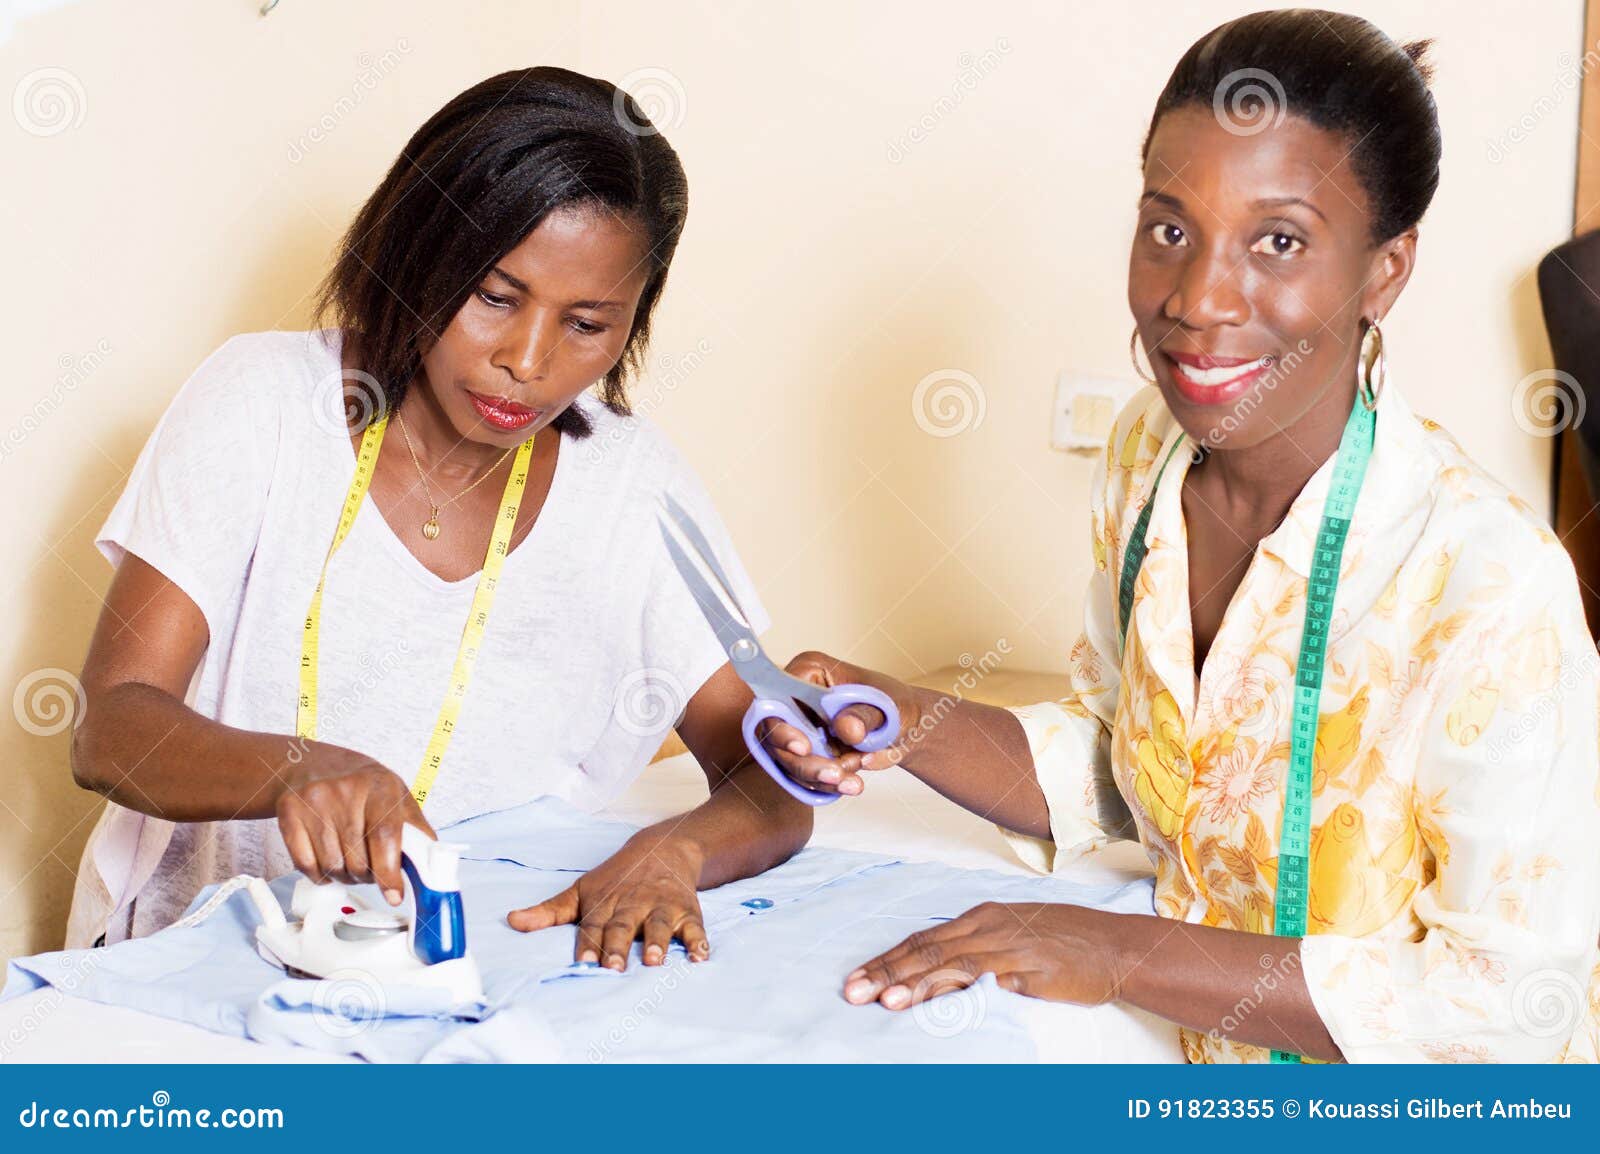 African Woman Seamstress Ironing Cloth Stock Photo, Picture and